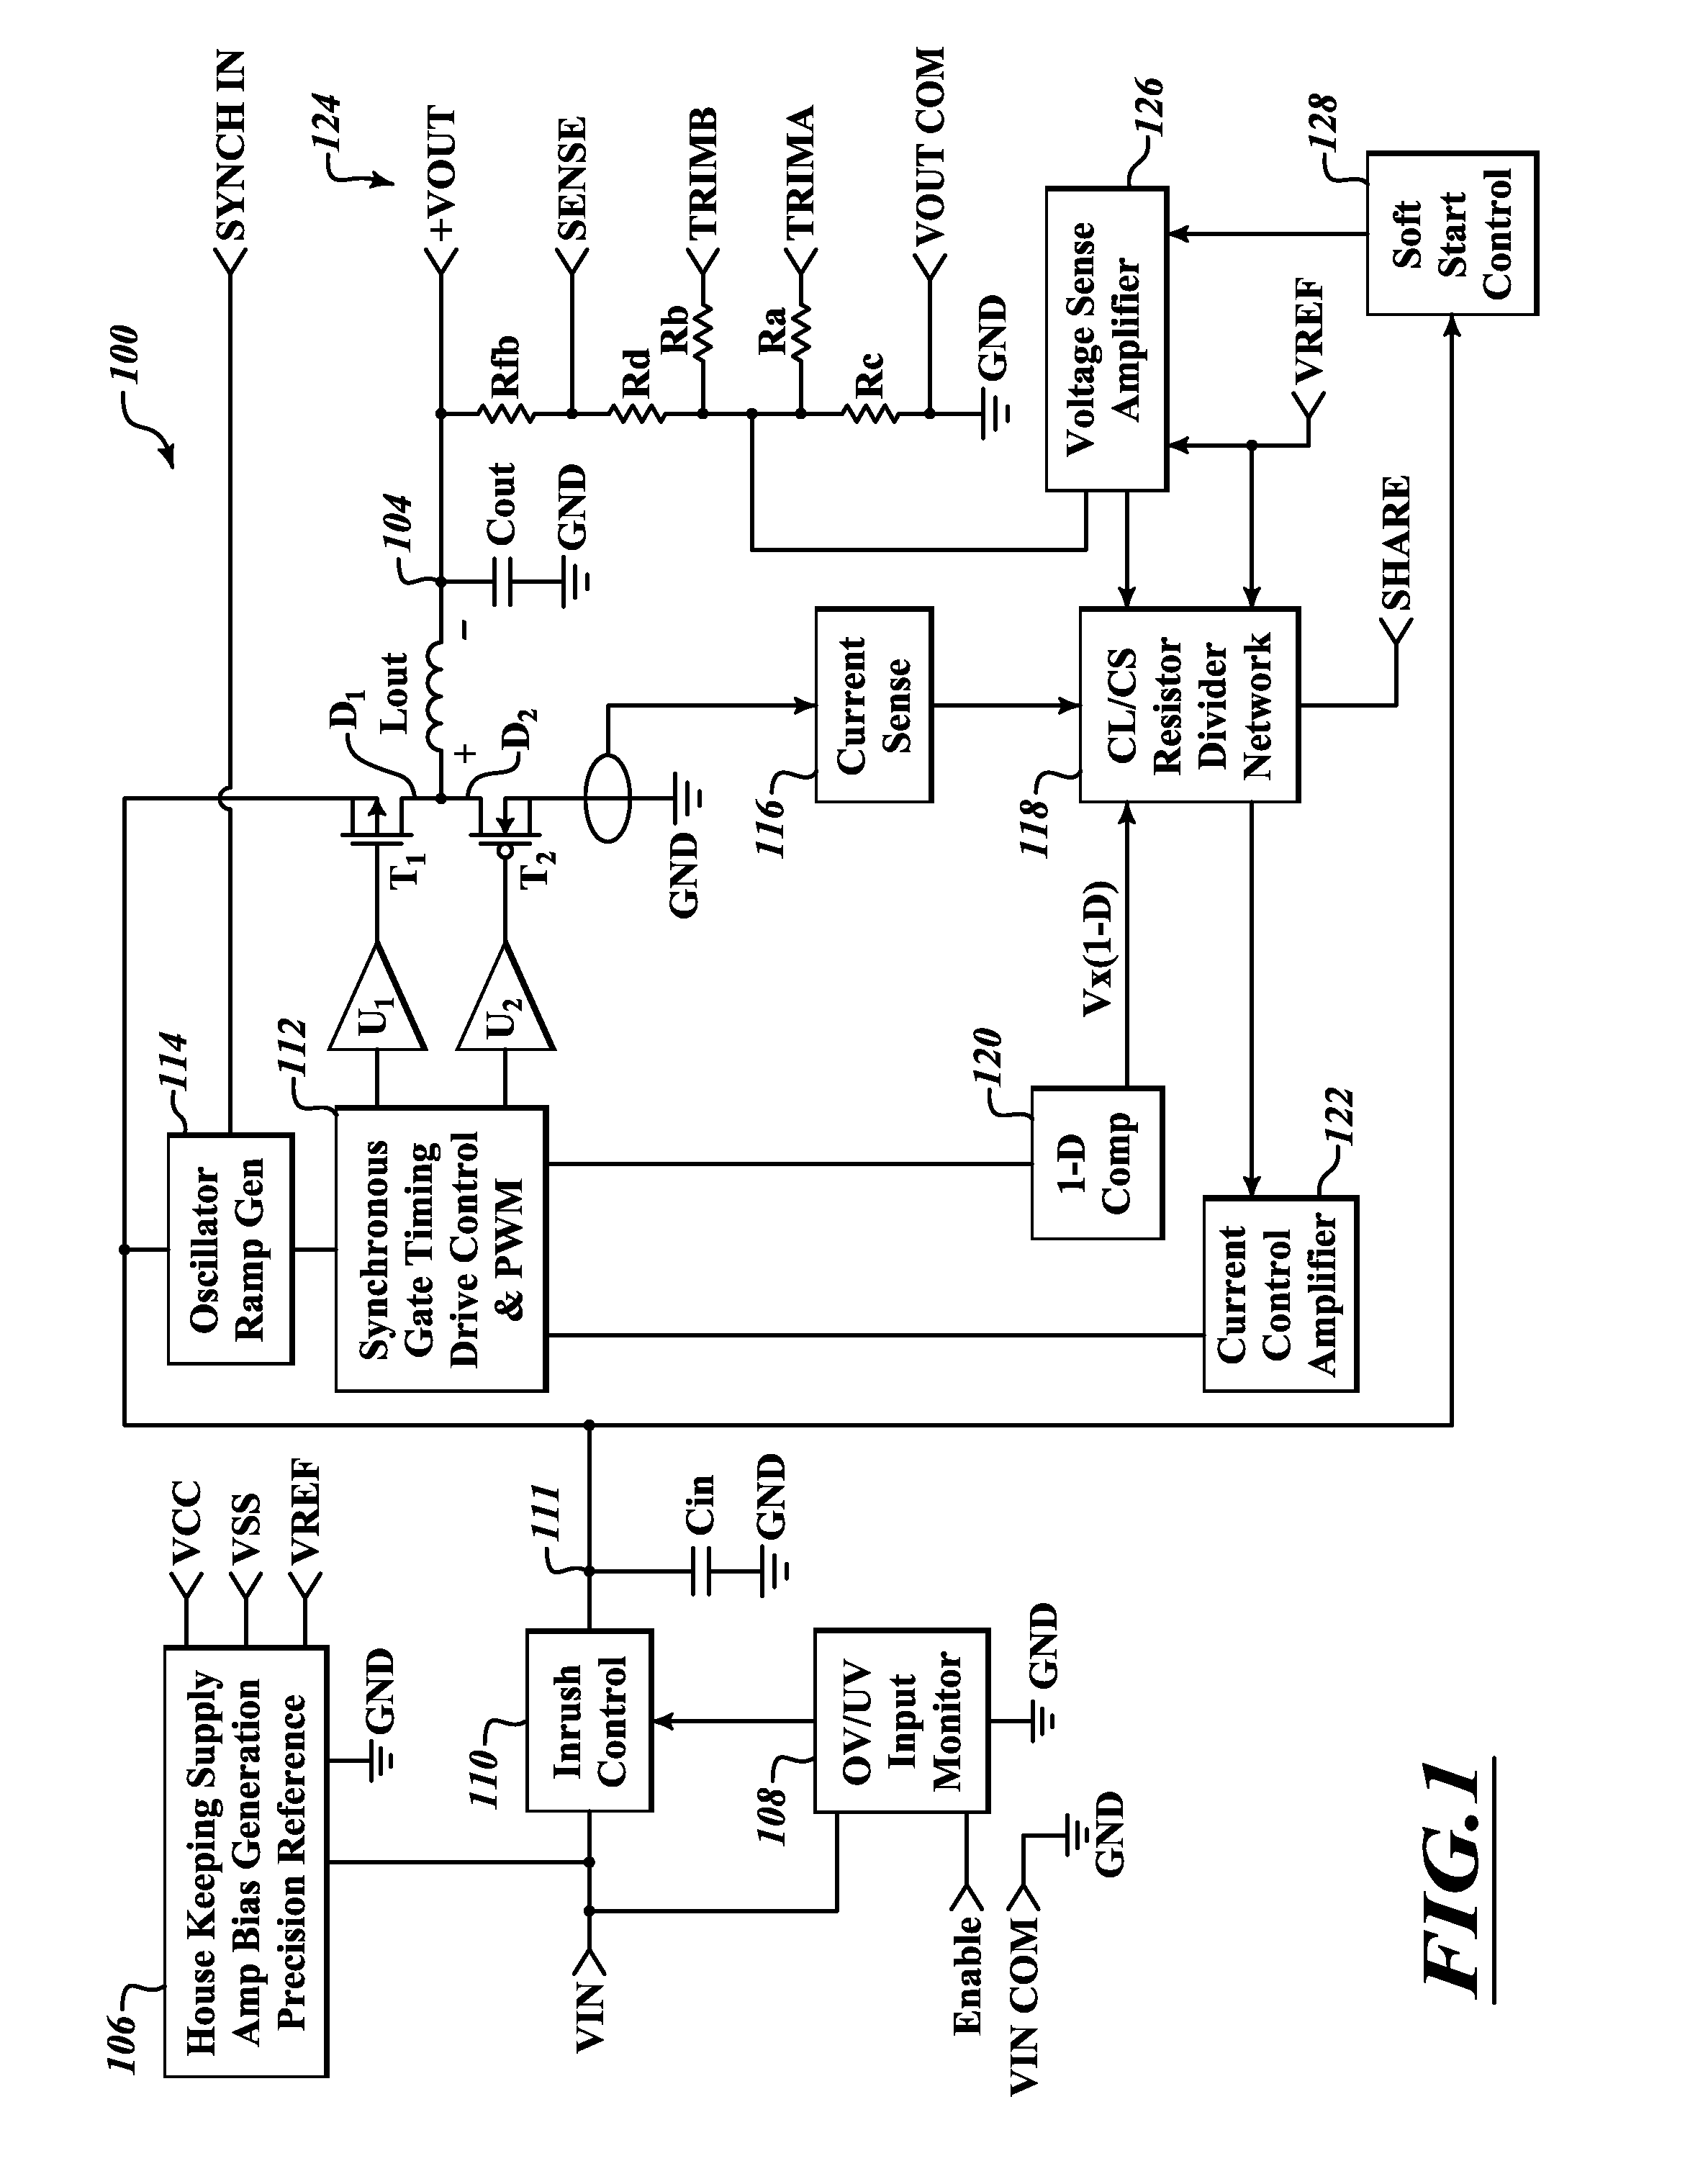 Self synchronizing power converter apparatus and method suitable for auxiliary bias for dynamic load applications